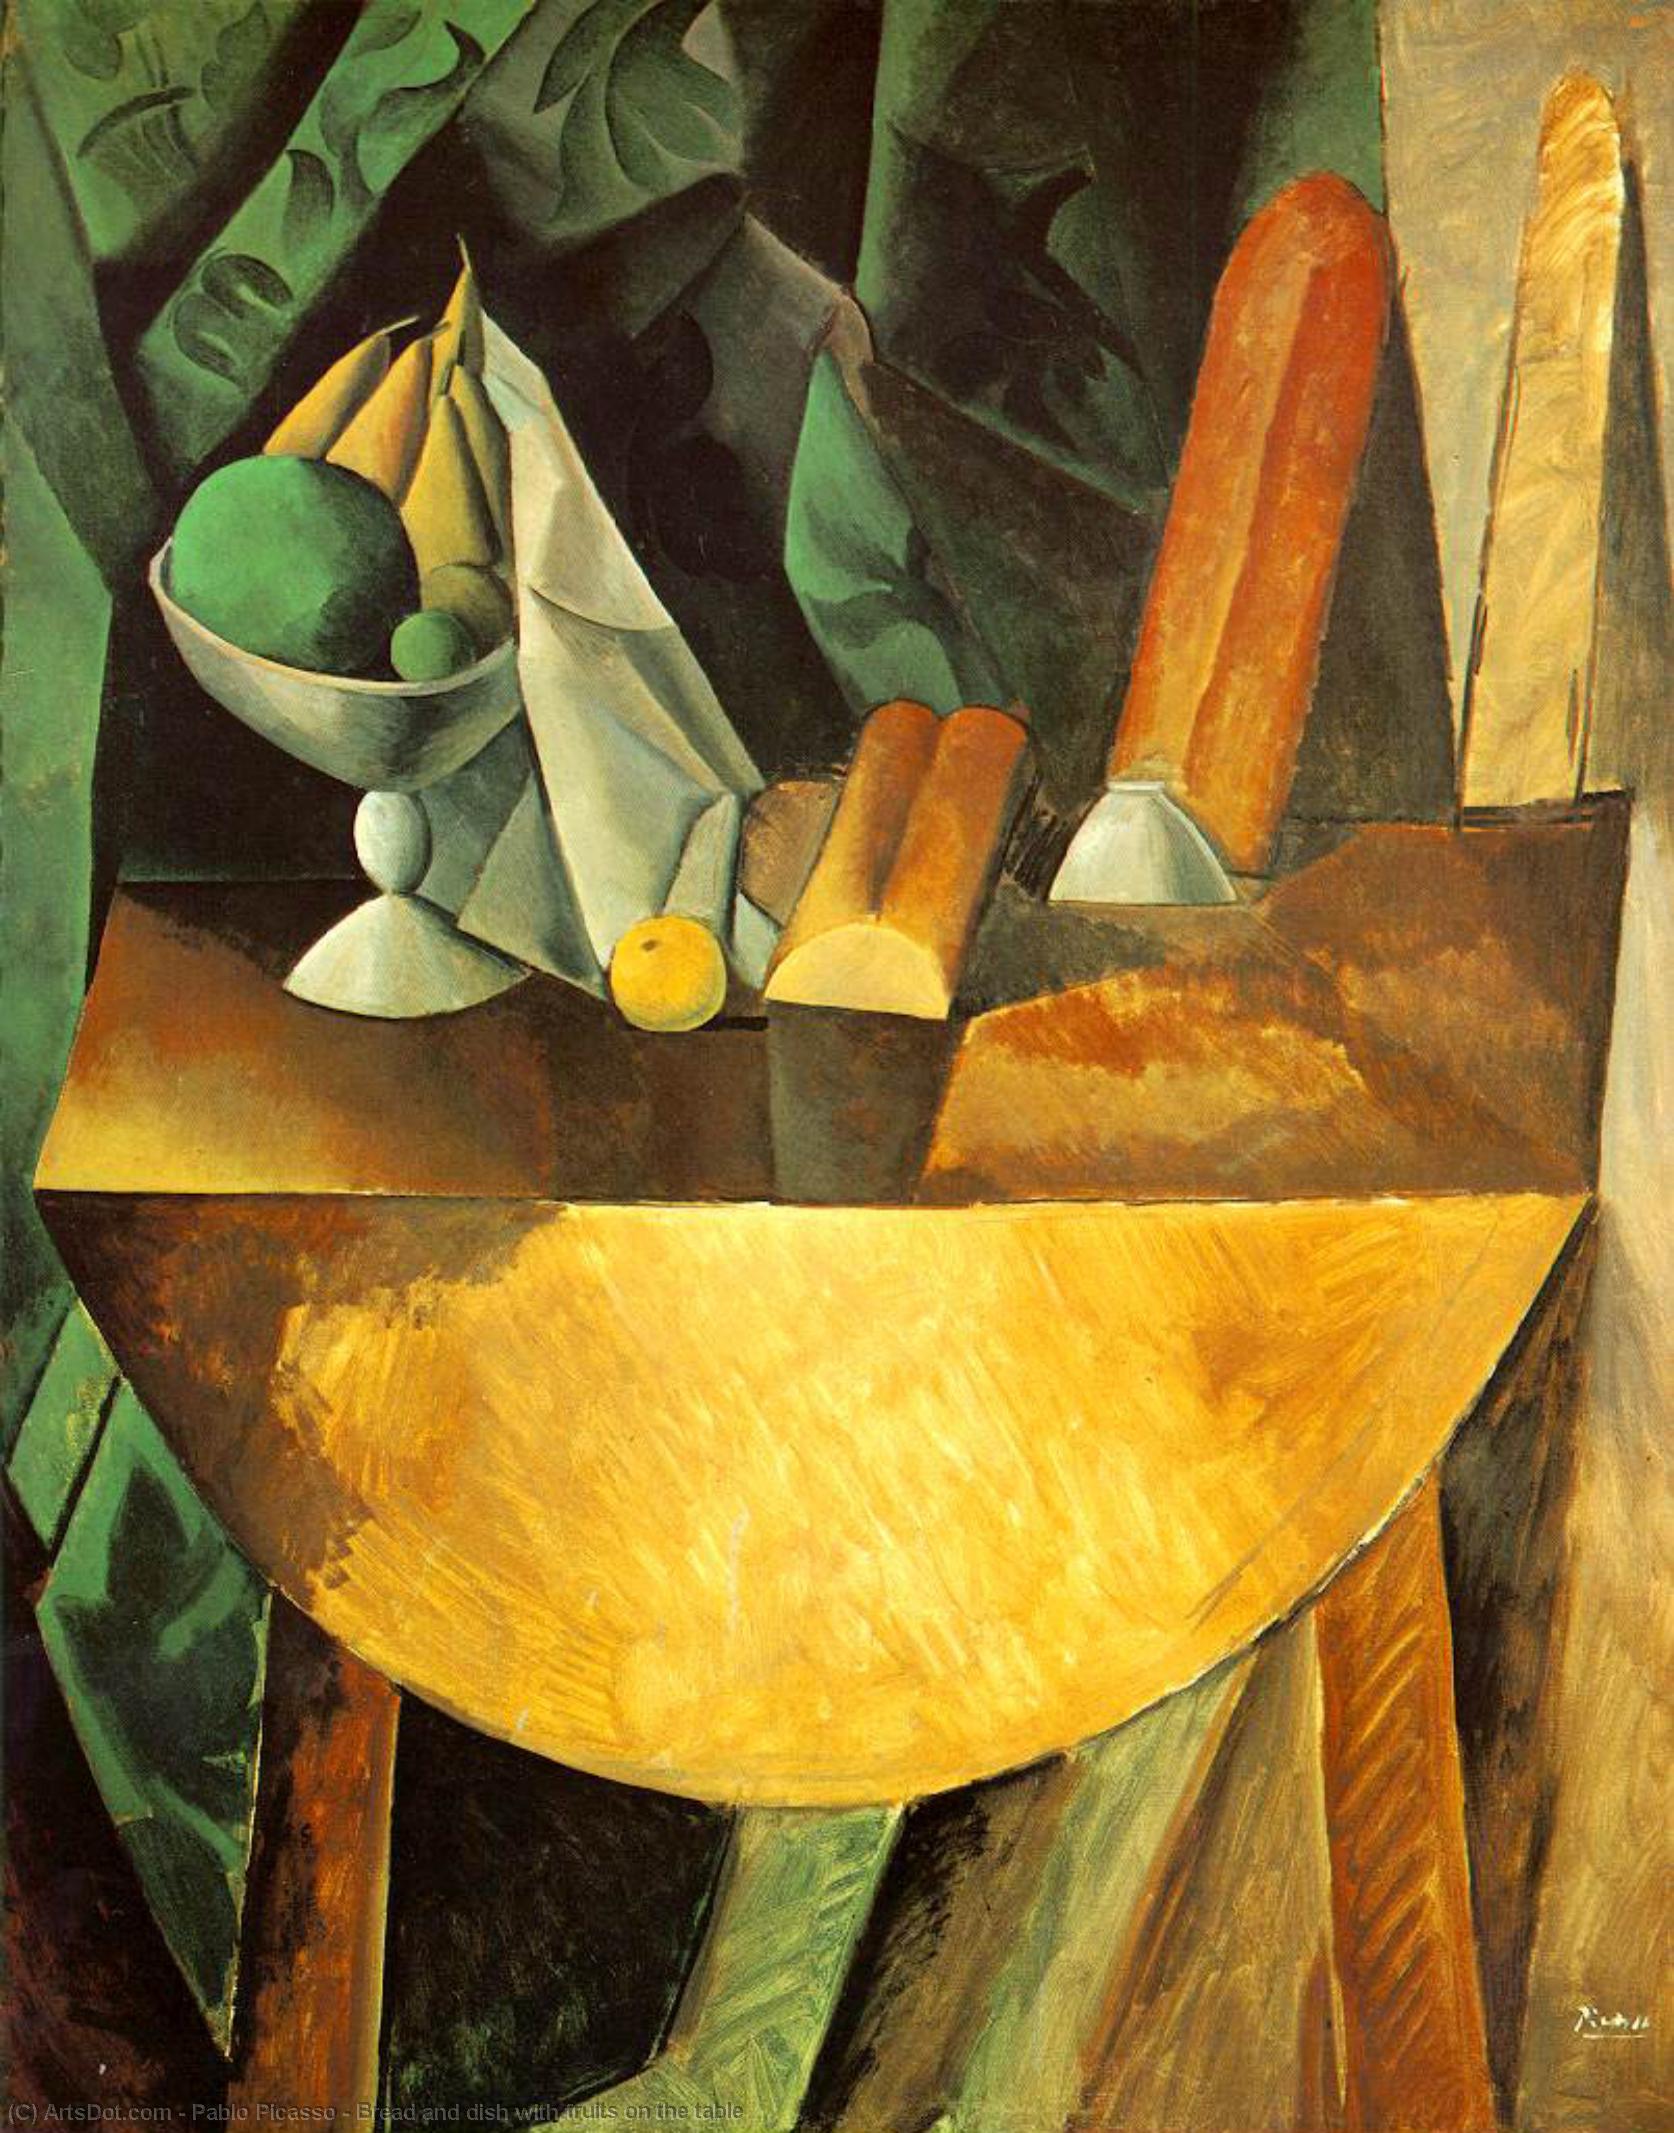 Wikioo.org - Encyklopedia Sztuk Pięknych - Malarstwo, Grafika Pablo Picasso - Bread and dish with fruits on the table